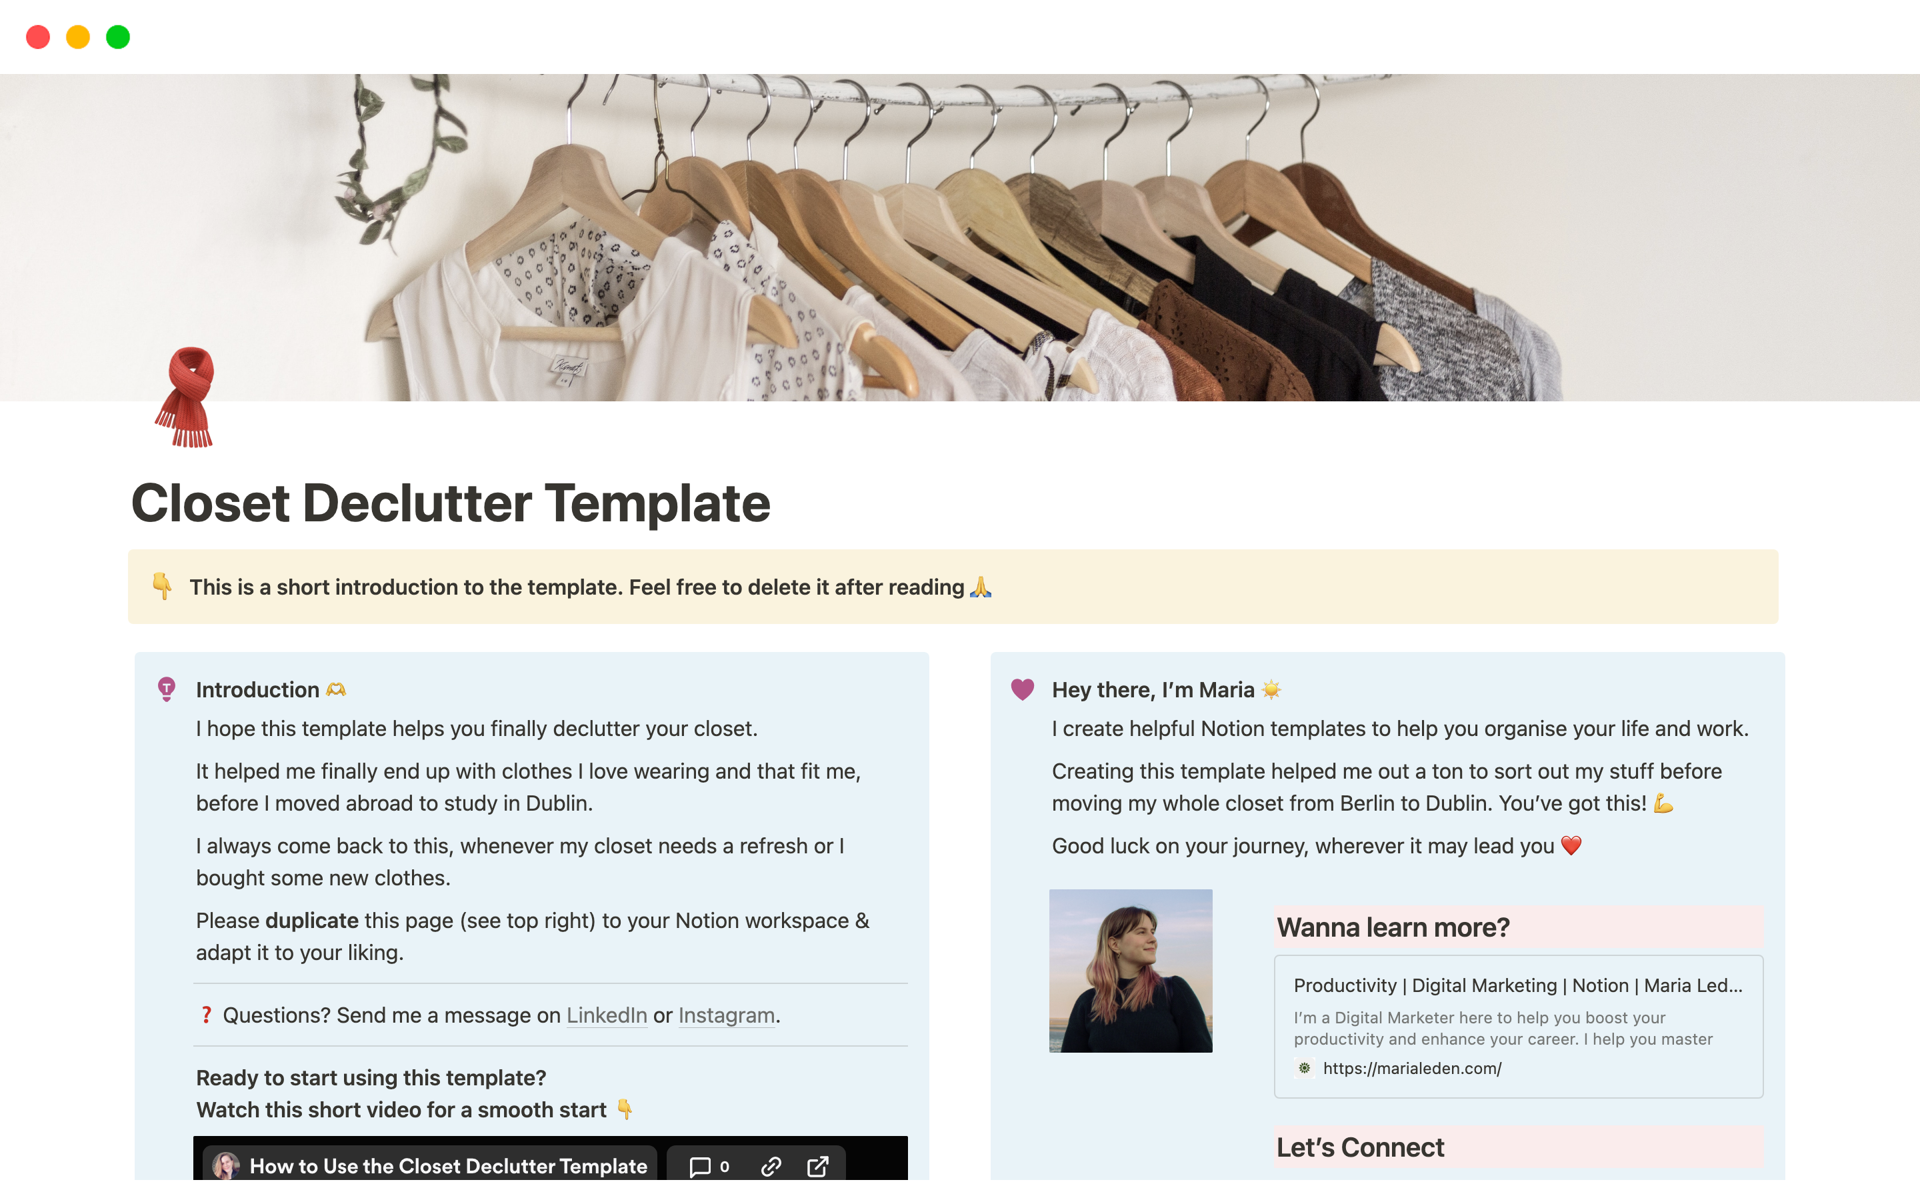 The closet declutter template allows you to sort through and label each clothing item, to decide what to keep and what to give up.